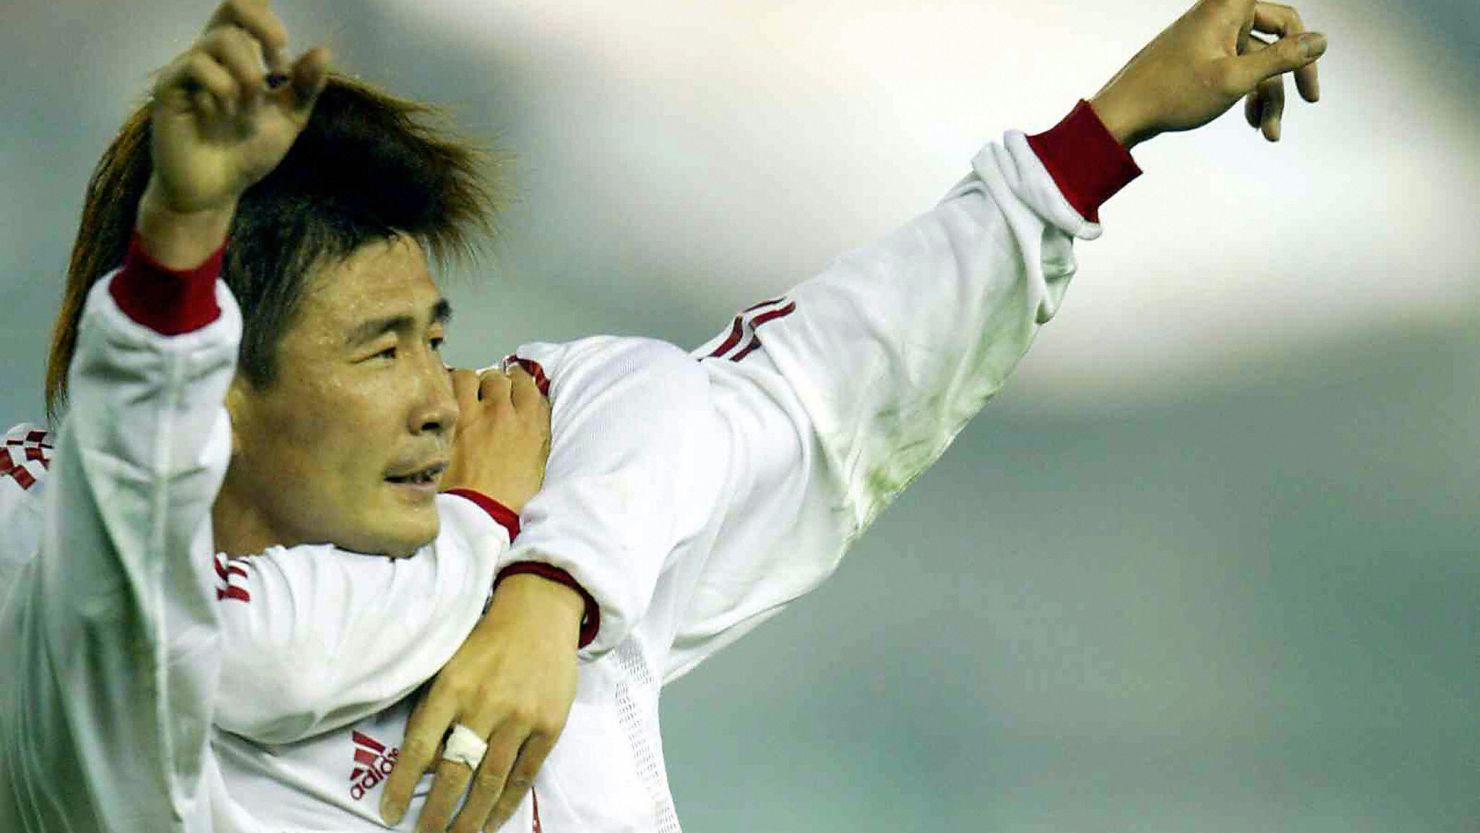 Hao Haidong, a retired Chinese soccer star, has openly demanded the downfall of China's ruling Communist Party.